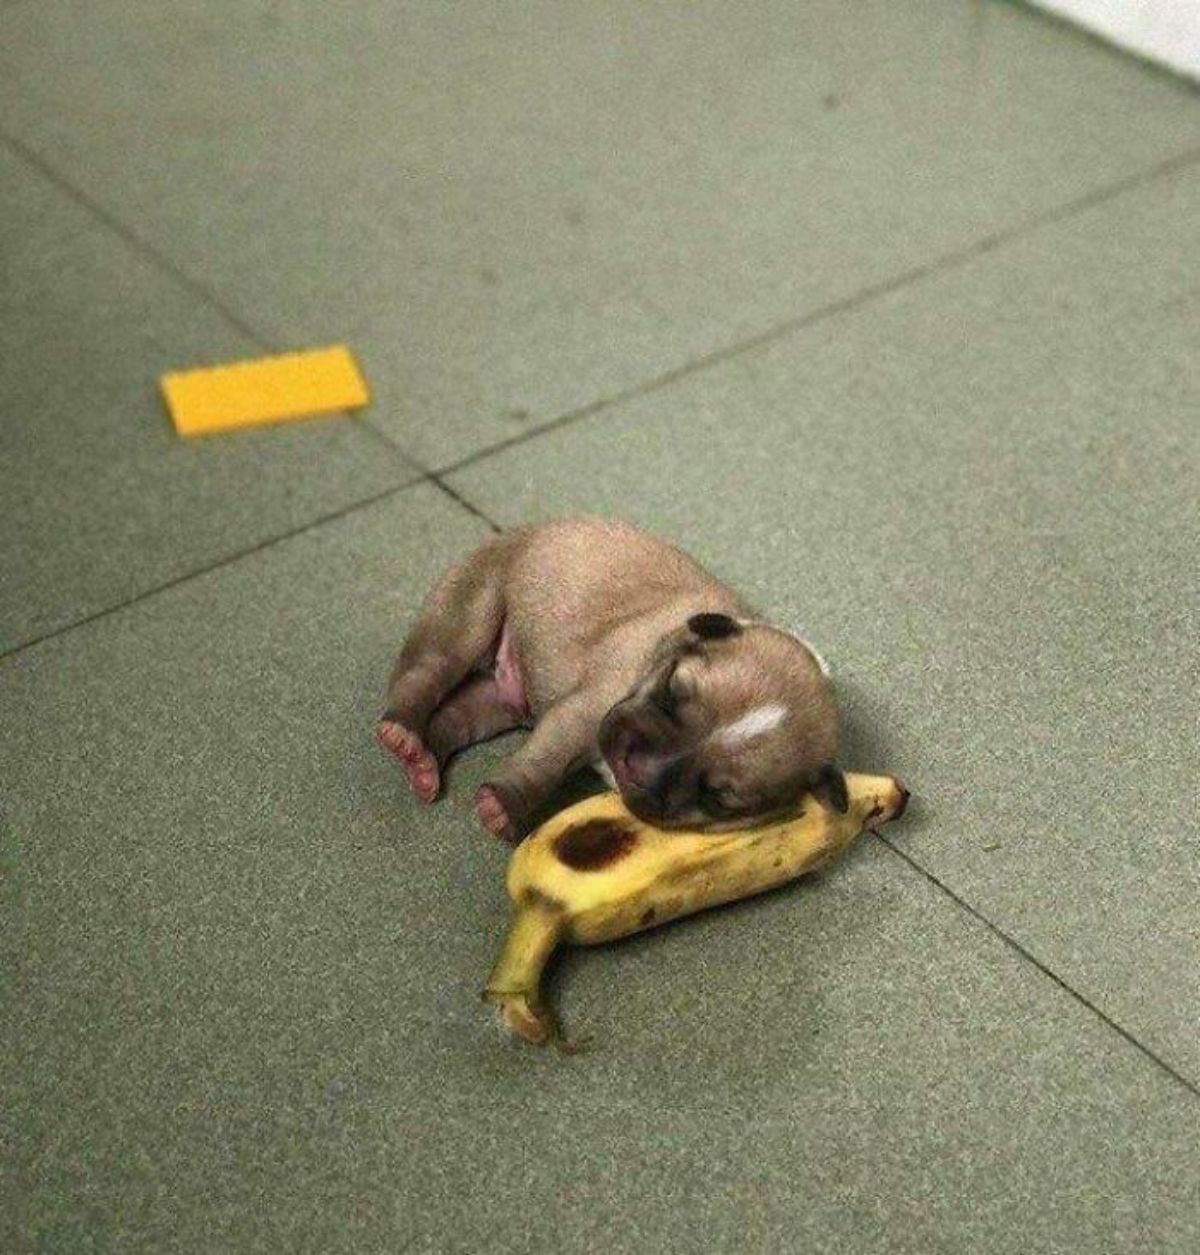 tiny brown and white puppy sleeping on the floor using a ripe yellow banana as a pillow